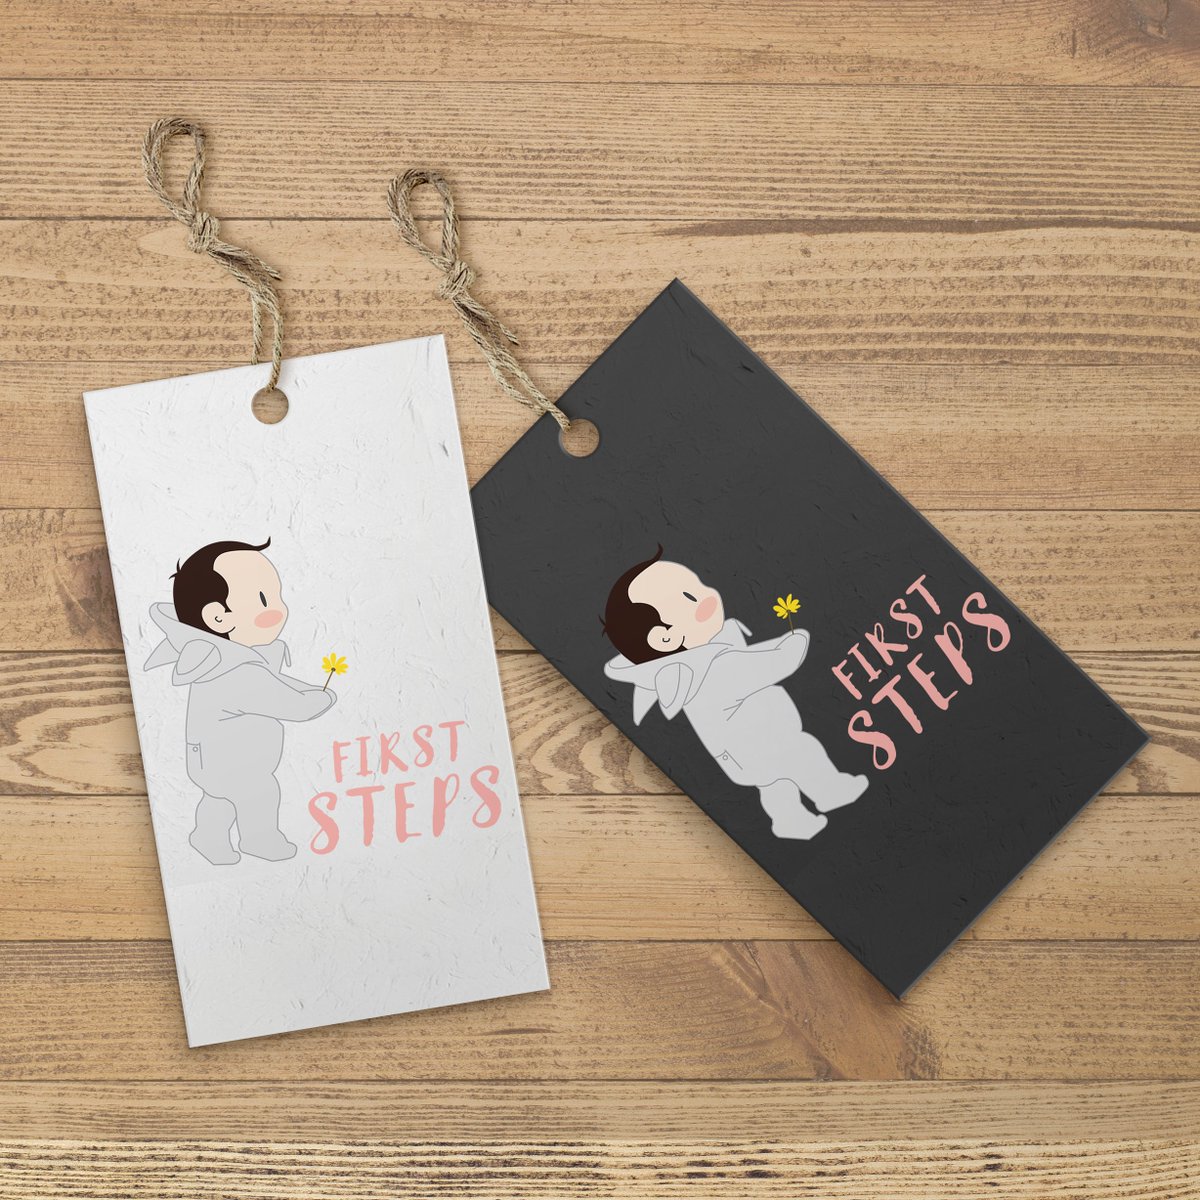 How cute! 'First Steps'. Check out this logo I developed for a children's clothing brand. I love being creative and coming up with these fun ideas. #TinyTrendsetters #KidsFashionFun #graphicdesign #smallbusiness